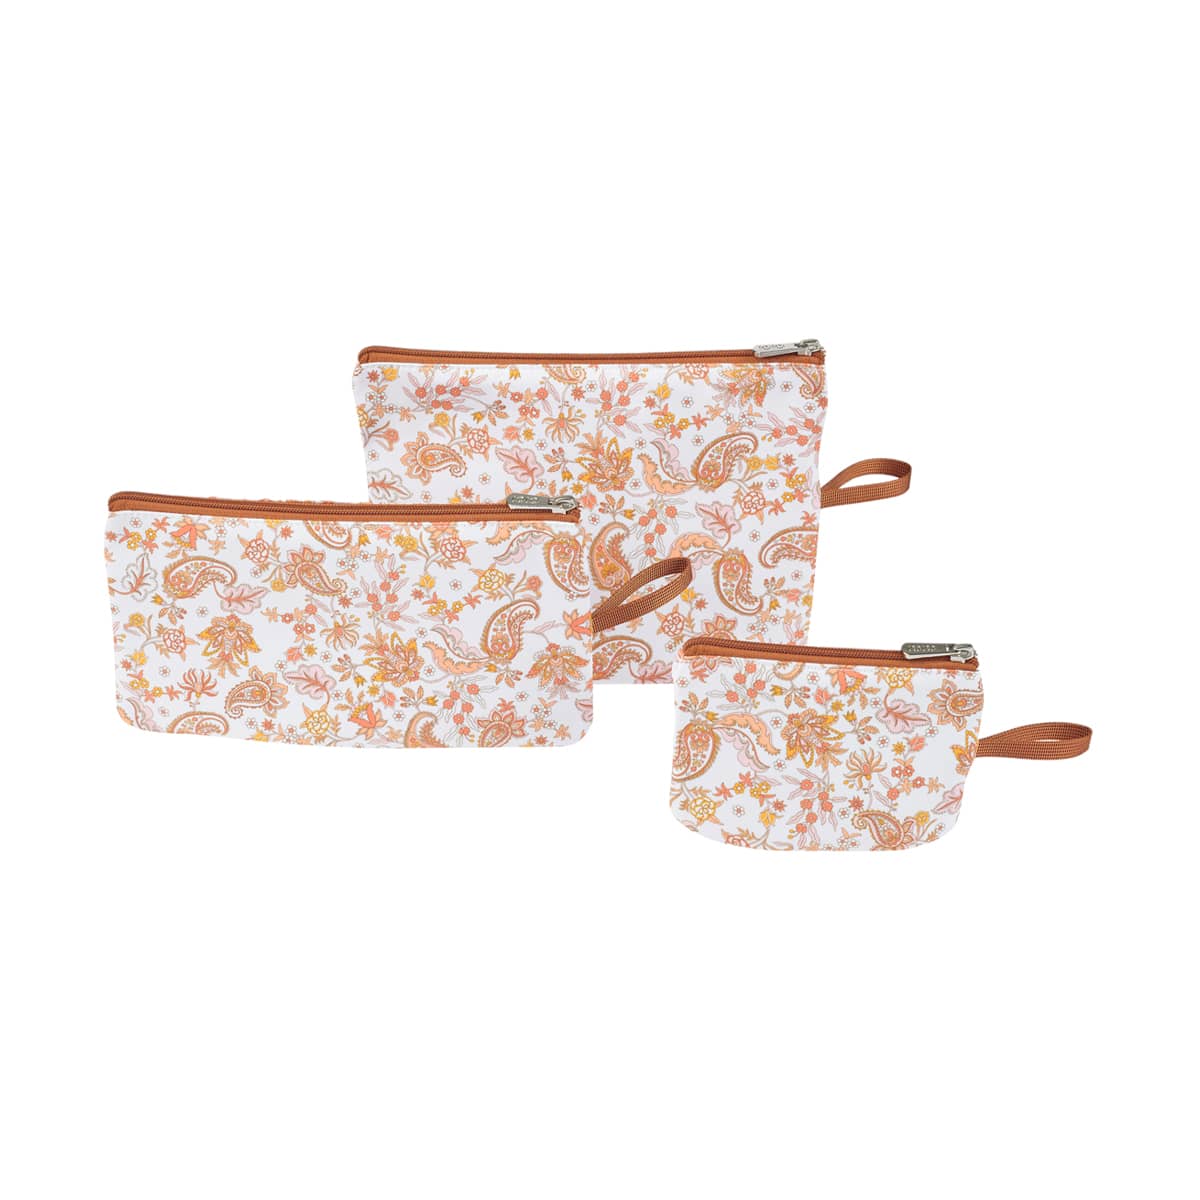 OiOi Packing Pouch Trio - Pink Paisley